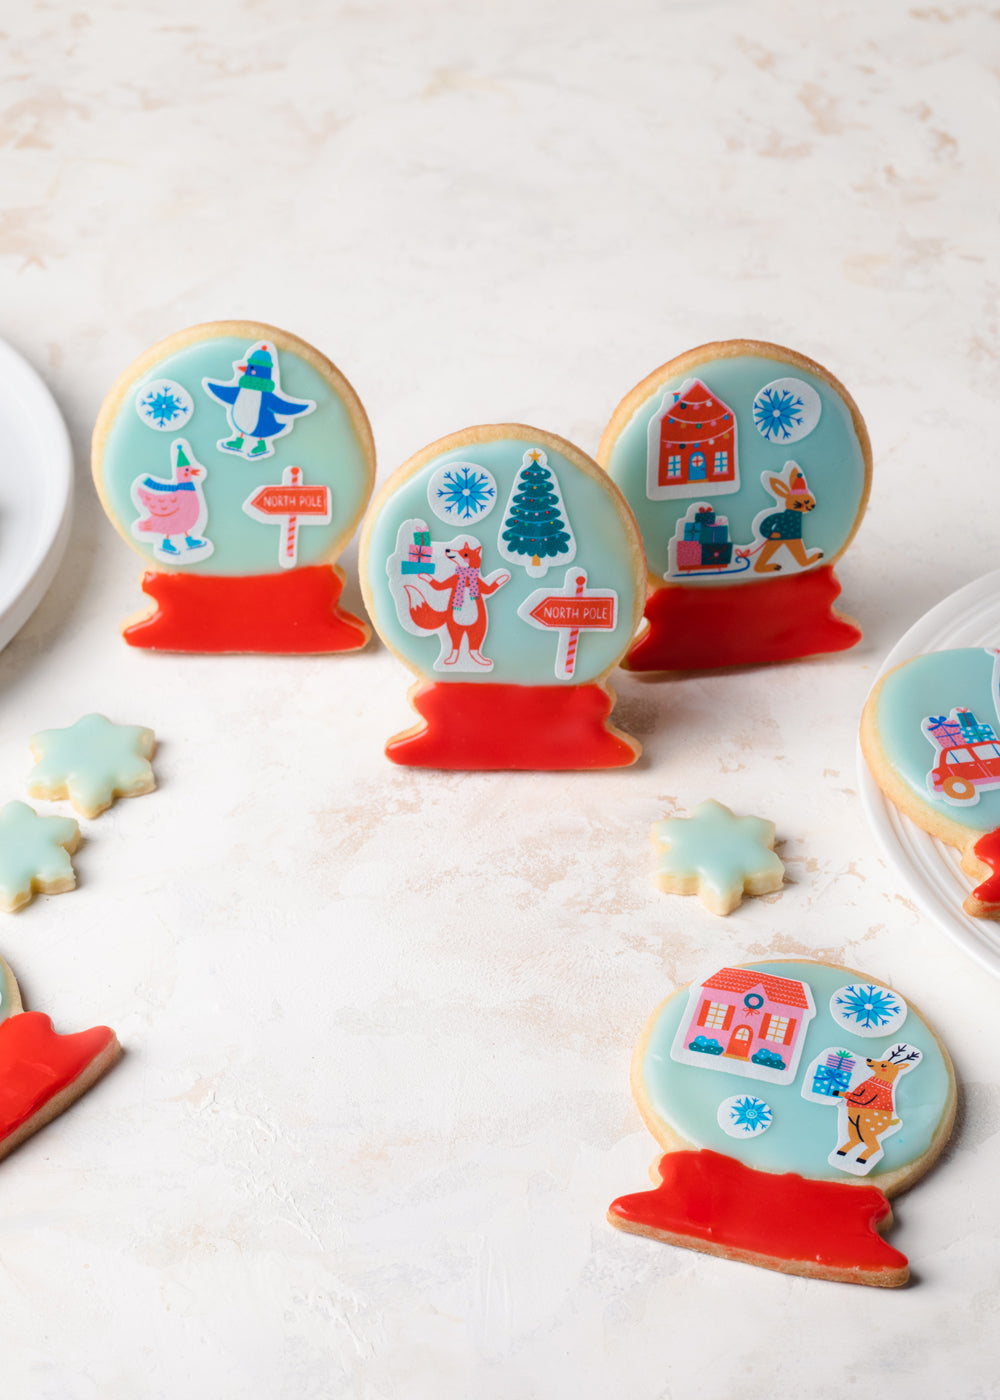 Christmas Is Coming Stickies® Edible Stickers